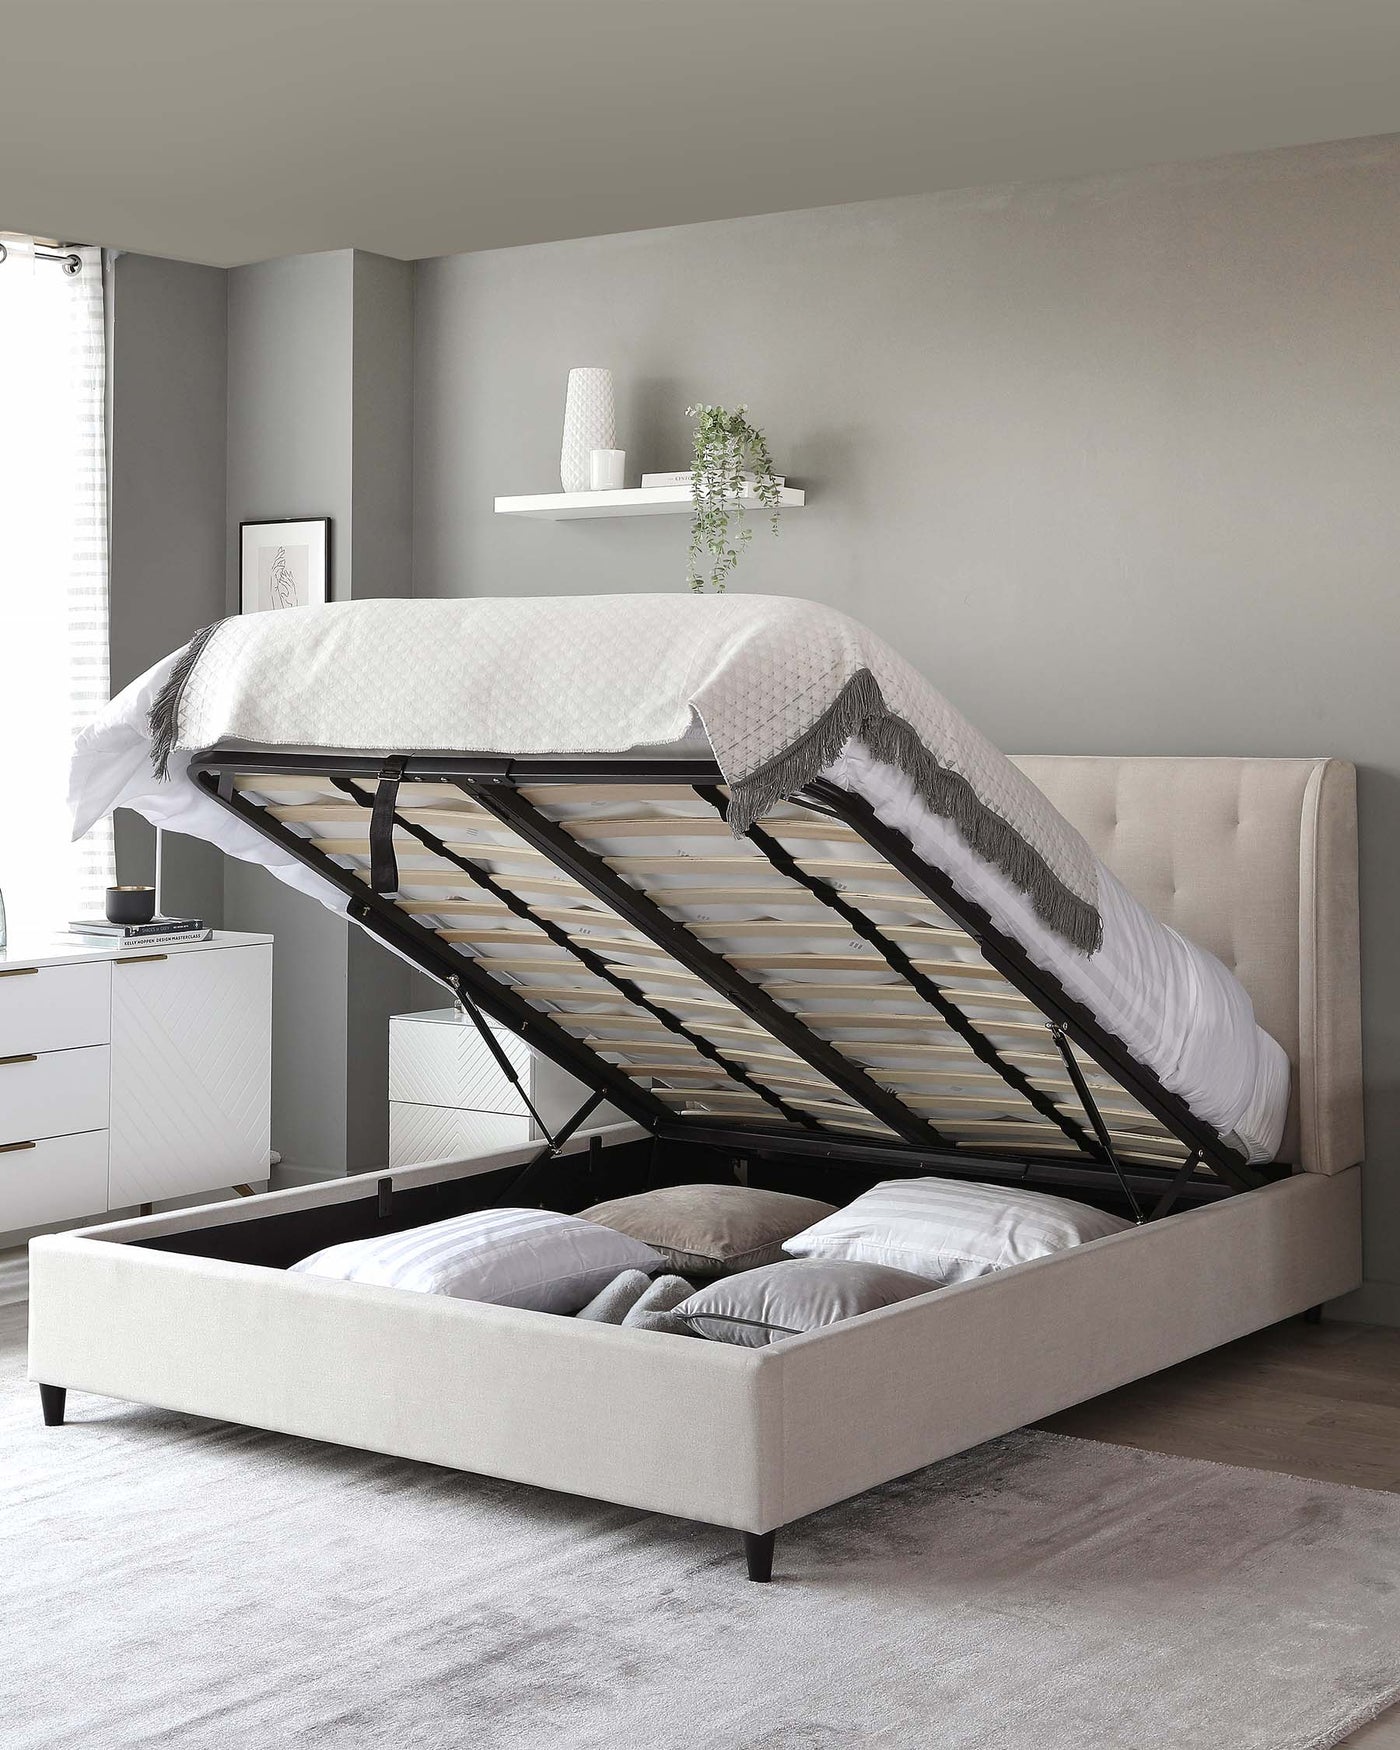 Beige upholstered storage bed with a lifted mattress platform revealing ample storage space underneath, paired with a modern white bedside drawer unit with a black lamp and matching dresser in a grey bedroom setting.